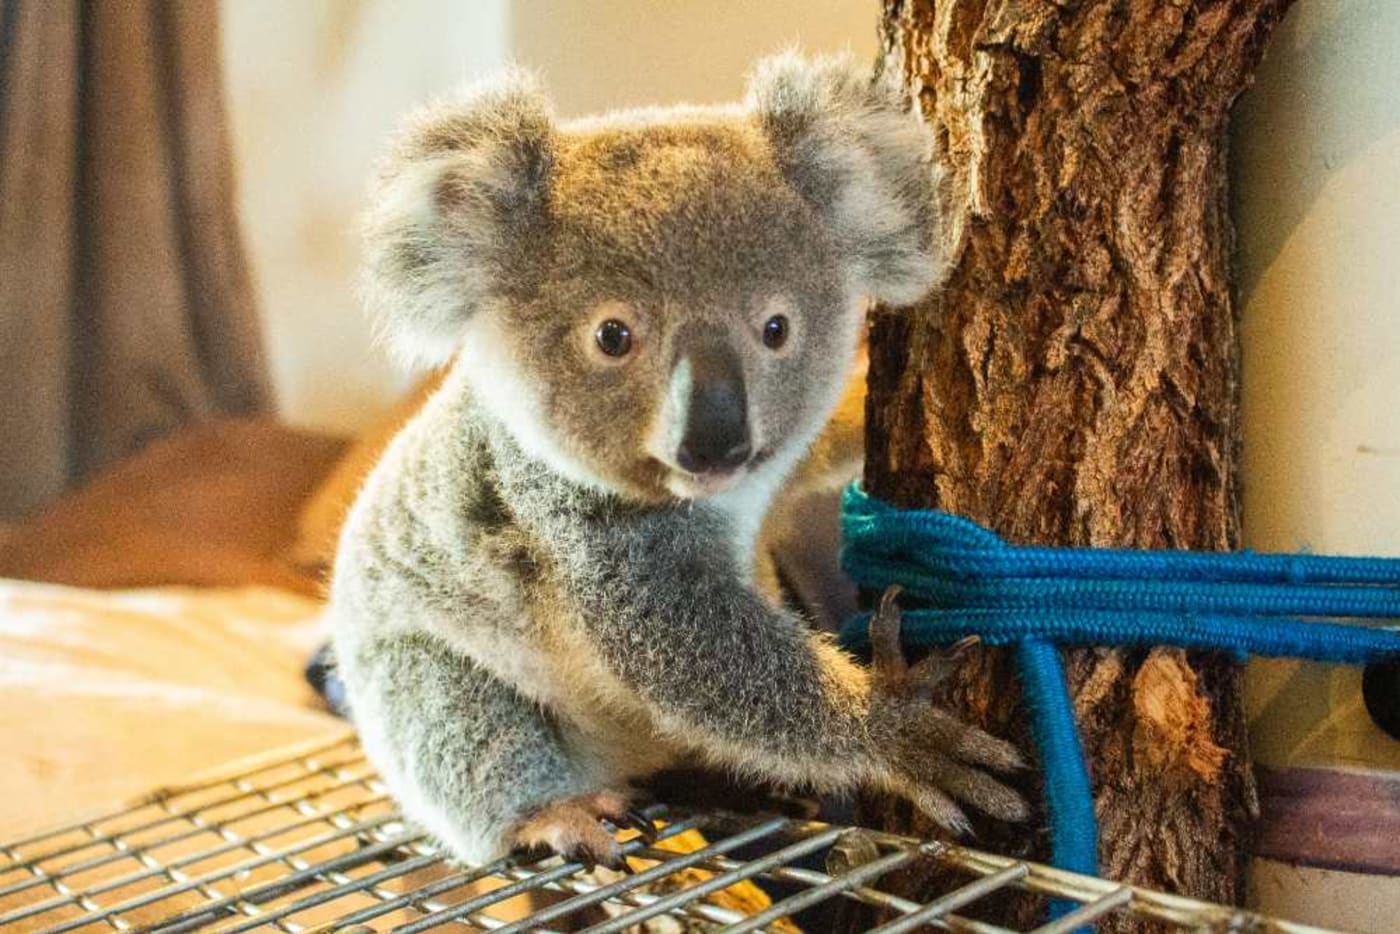 A young koala joey in care with Ipswich Koala Protection Society